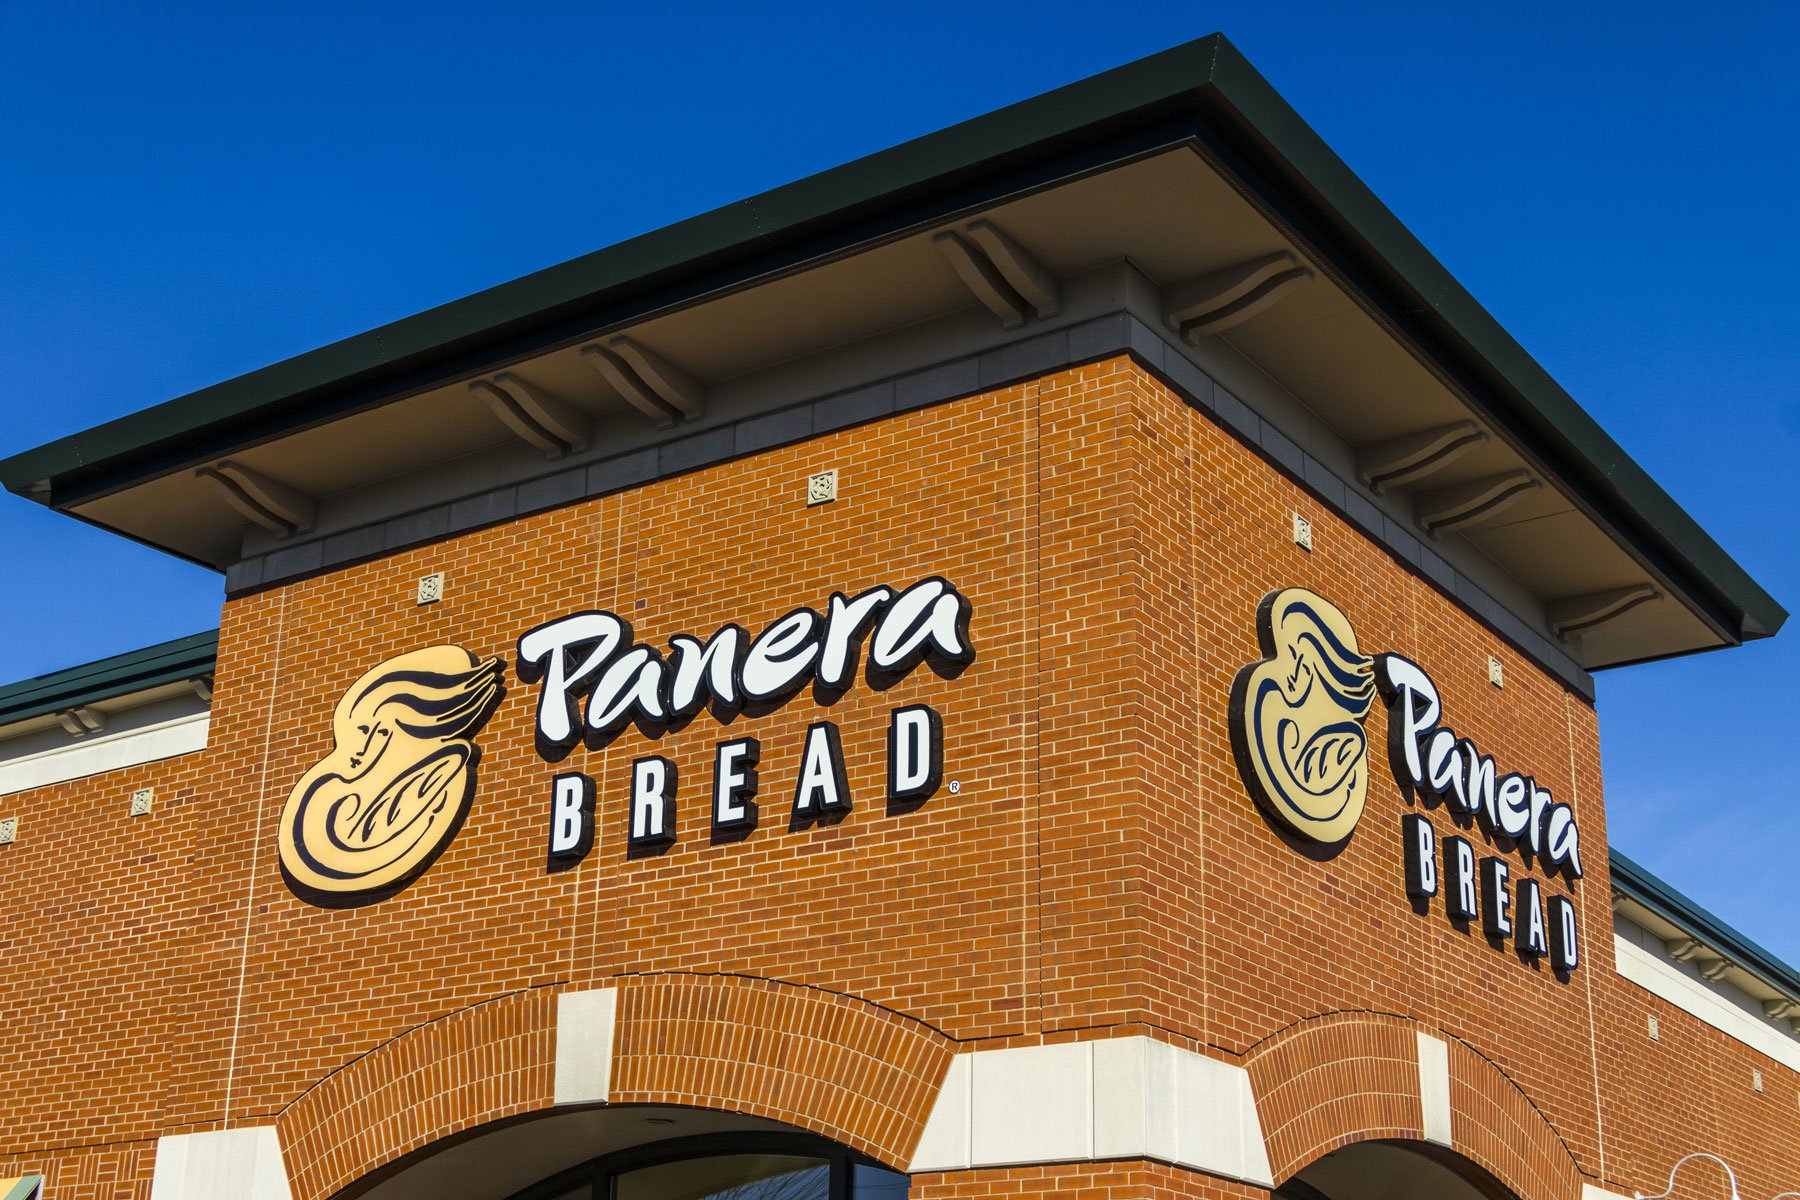 What to order at Panera Bread for stable blood sugar